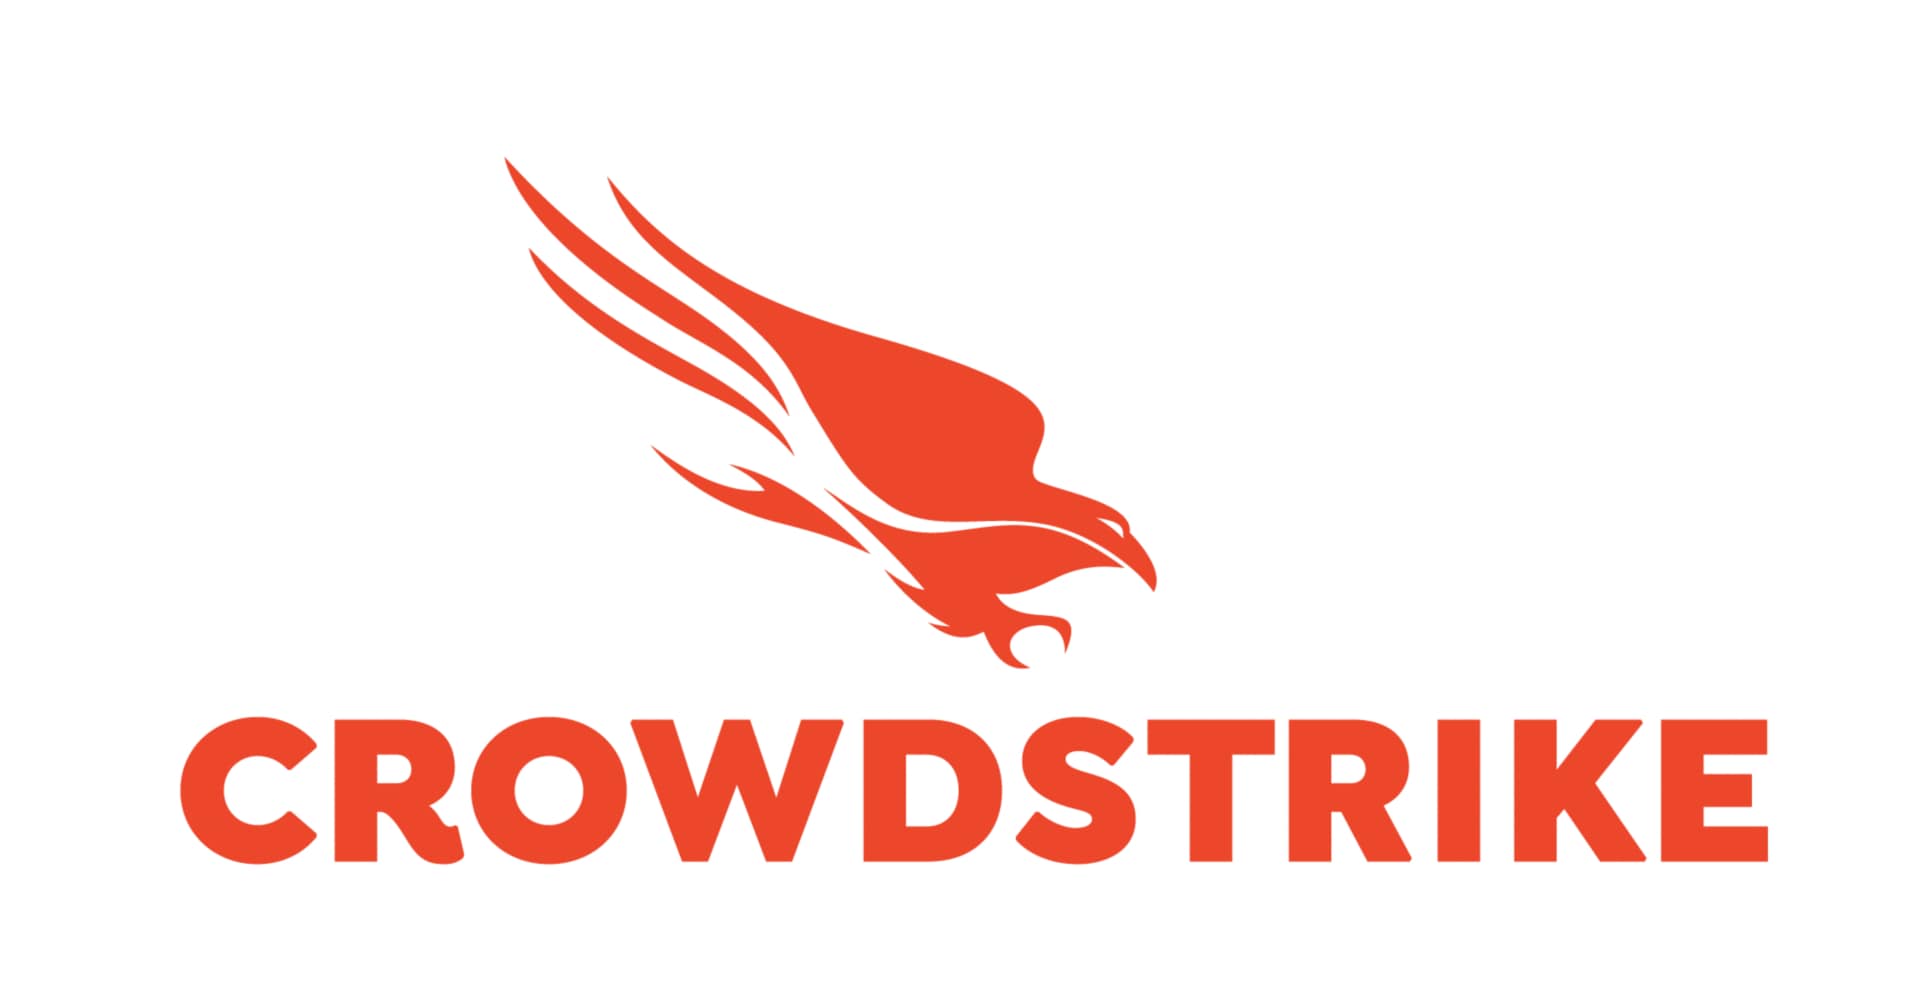 CrowdStrike 8-Month Falcon Cloud Security Reserved - Flex Software